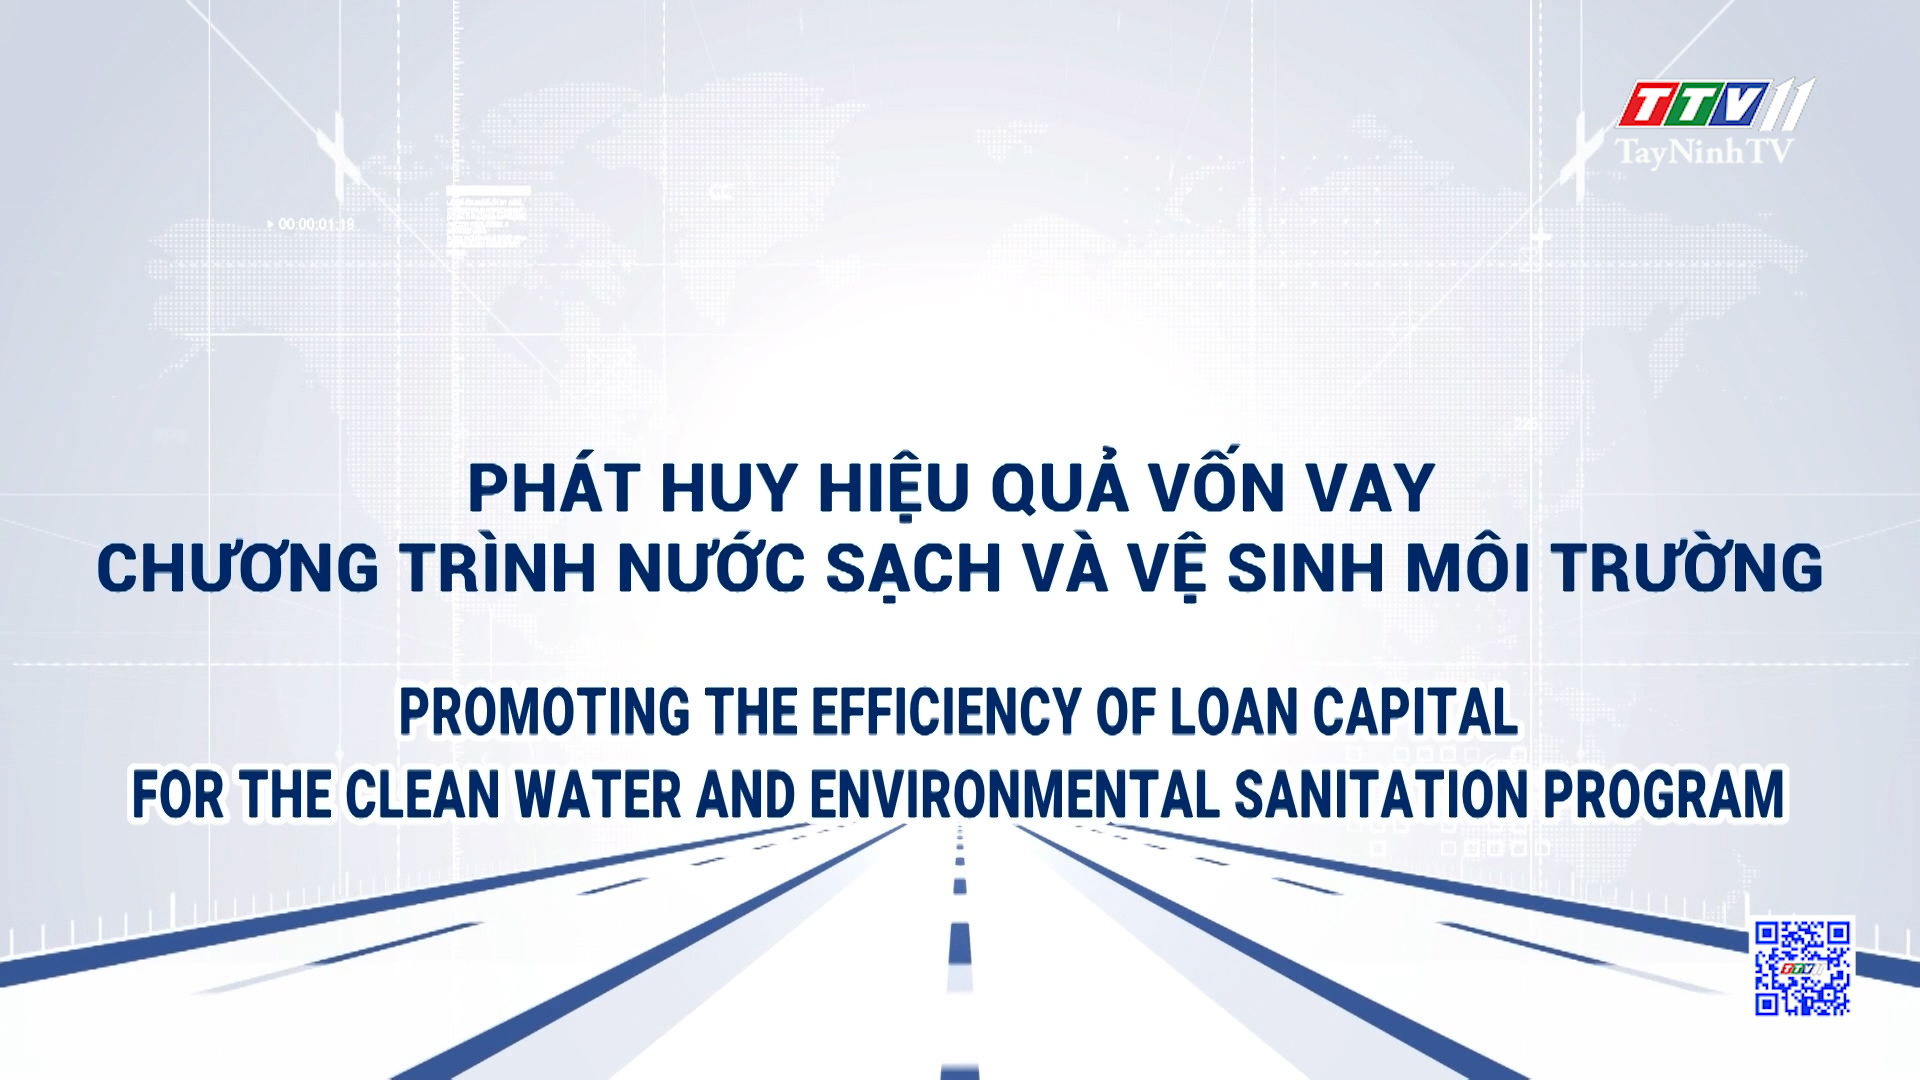 Promoting the efficiency of loan capital for the clean water and environmental sanitation program | POLICY COMMUNICATION | TayNinhTVToday